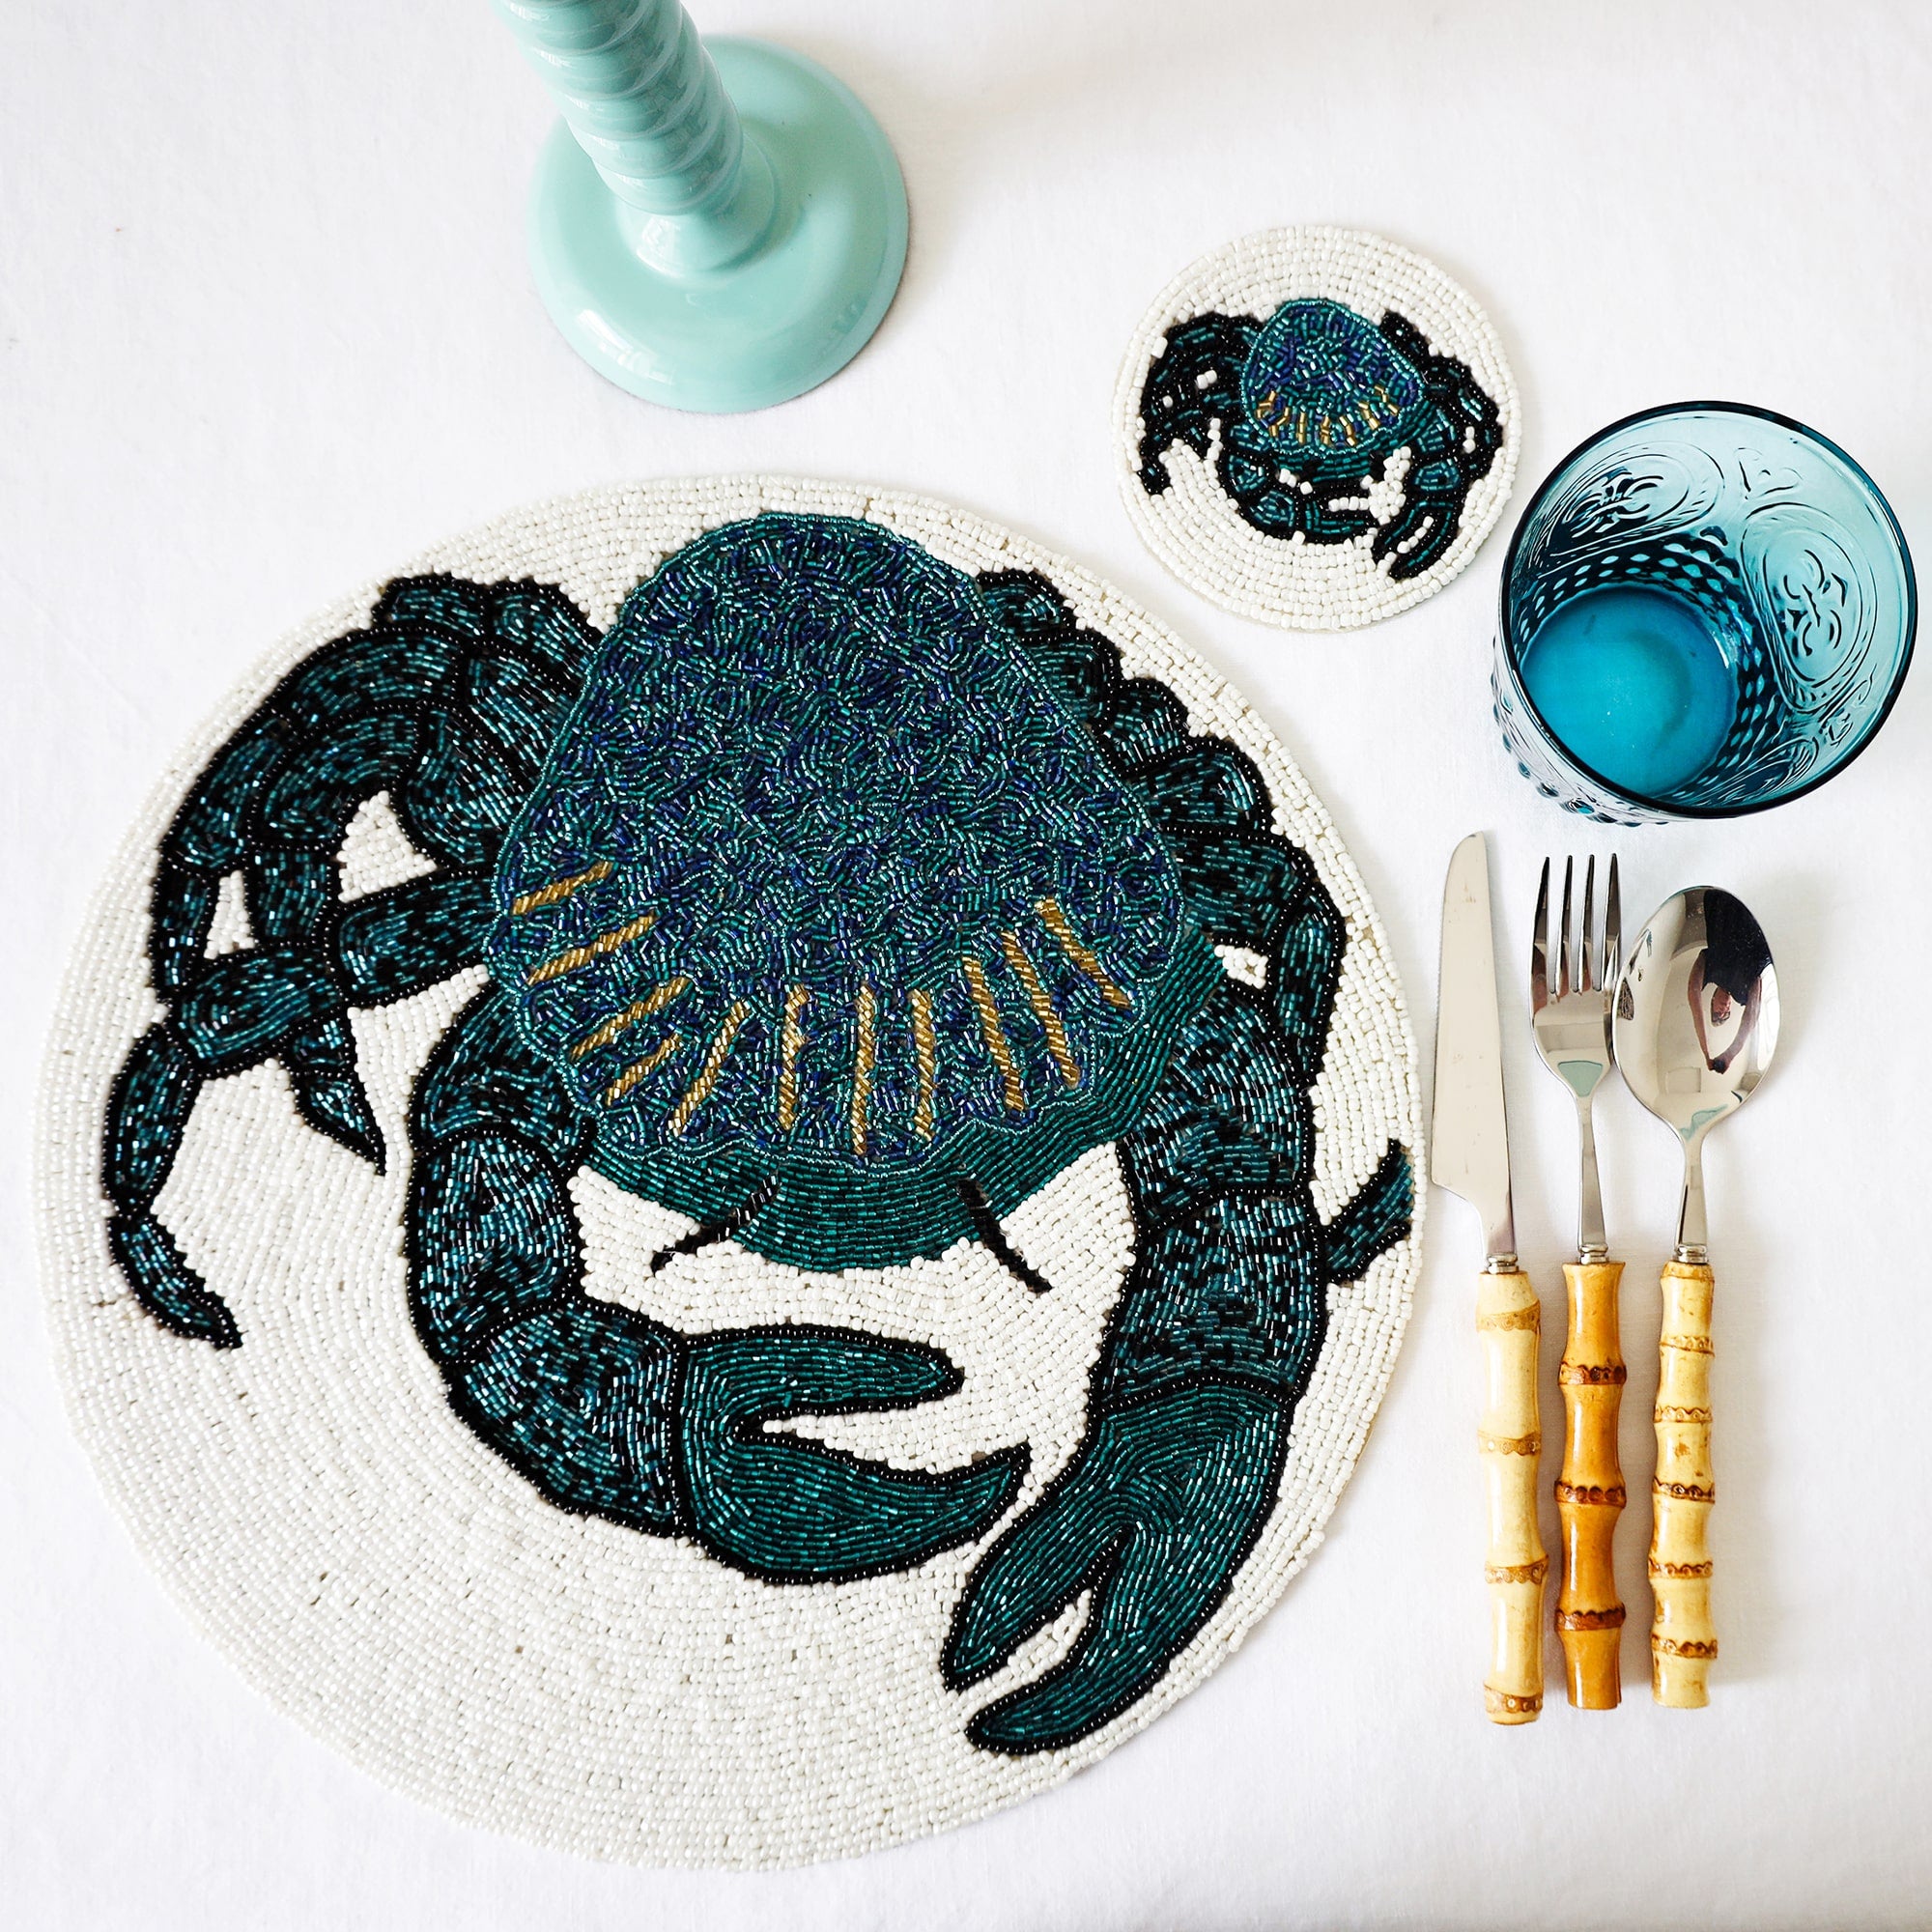 Handmade glass beaded coaster with a Crab design next to a matching placemat on a table setting with glasses,cutlery and a candlestick